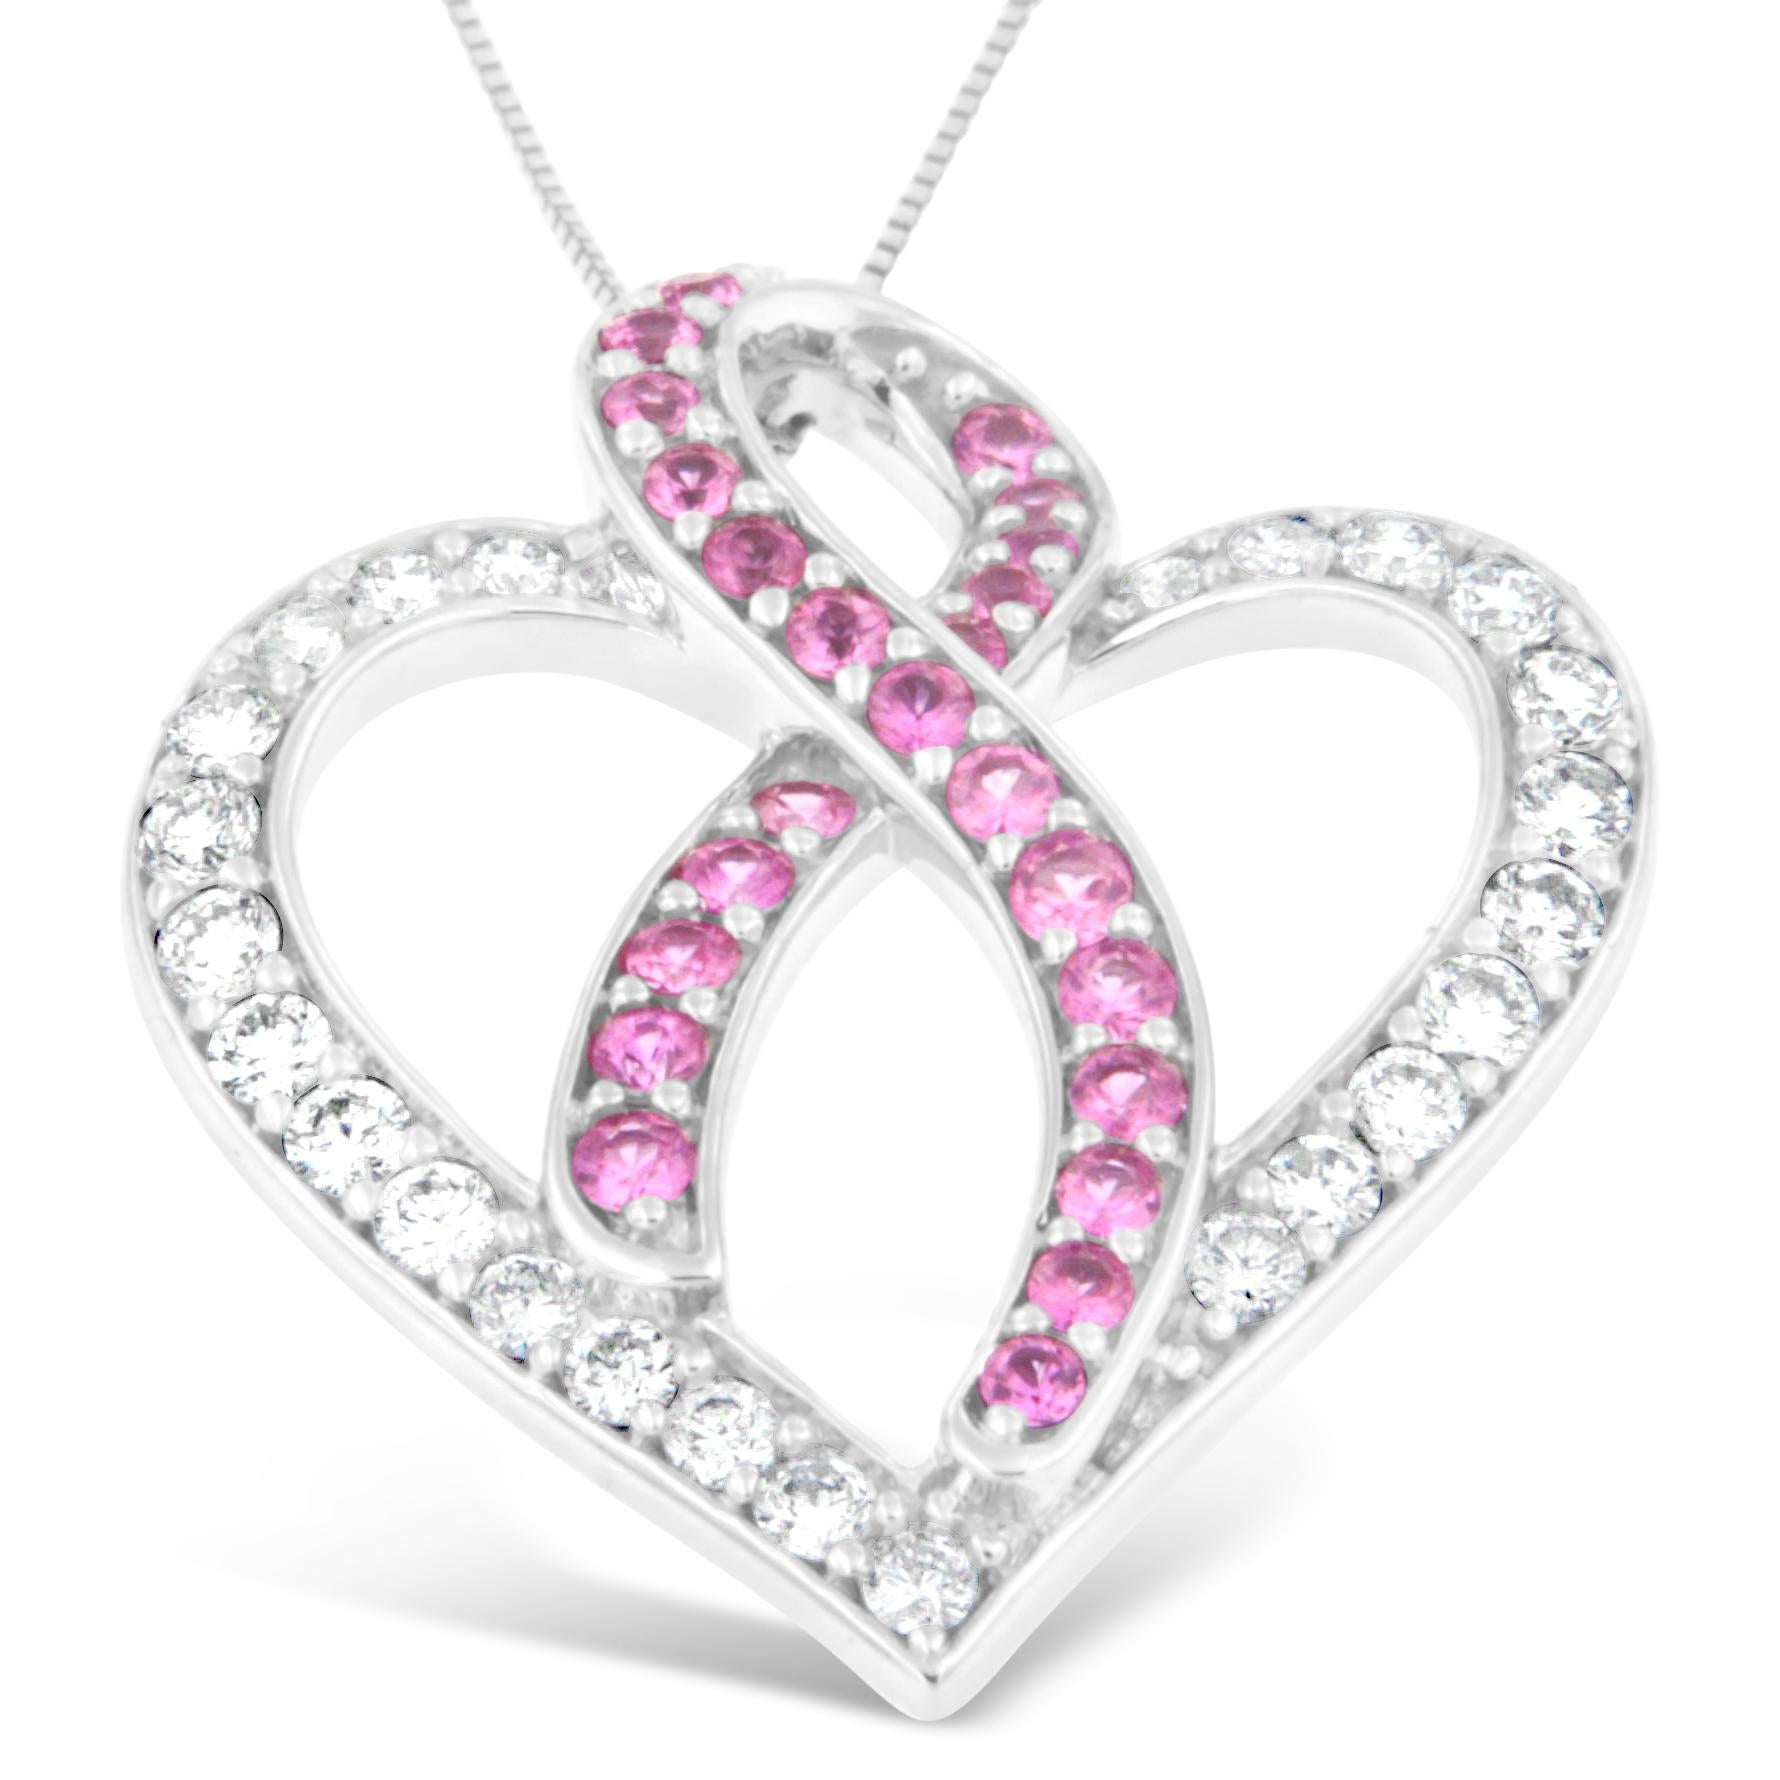 This romantic yet radiant necklace is suspended from 14 karats white gold. It is formed in the shape of an interwoven ribbon and heart. The lovely heart is embellished with sparkling round cut diamonds, and the ribbon design is decorated with